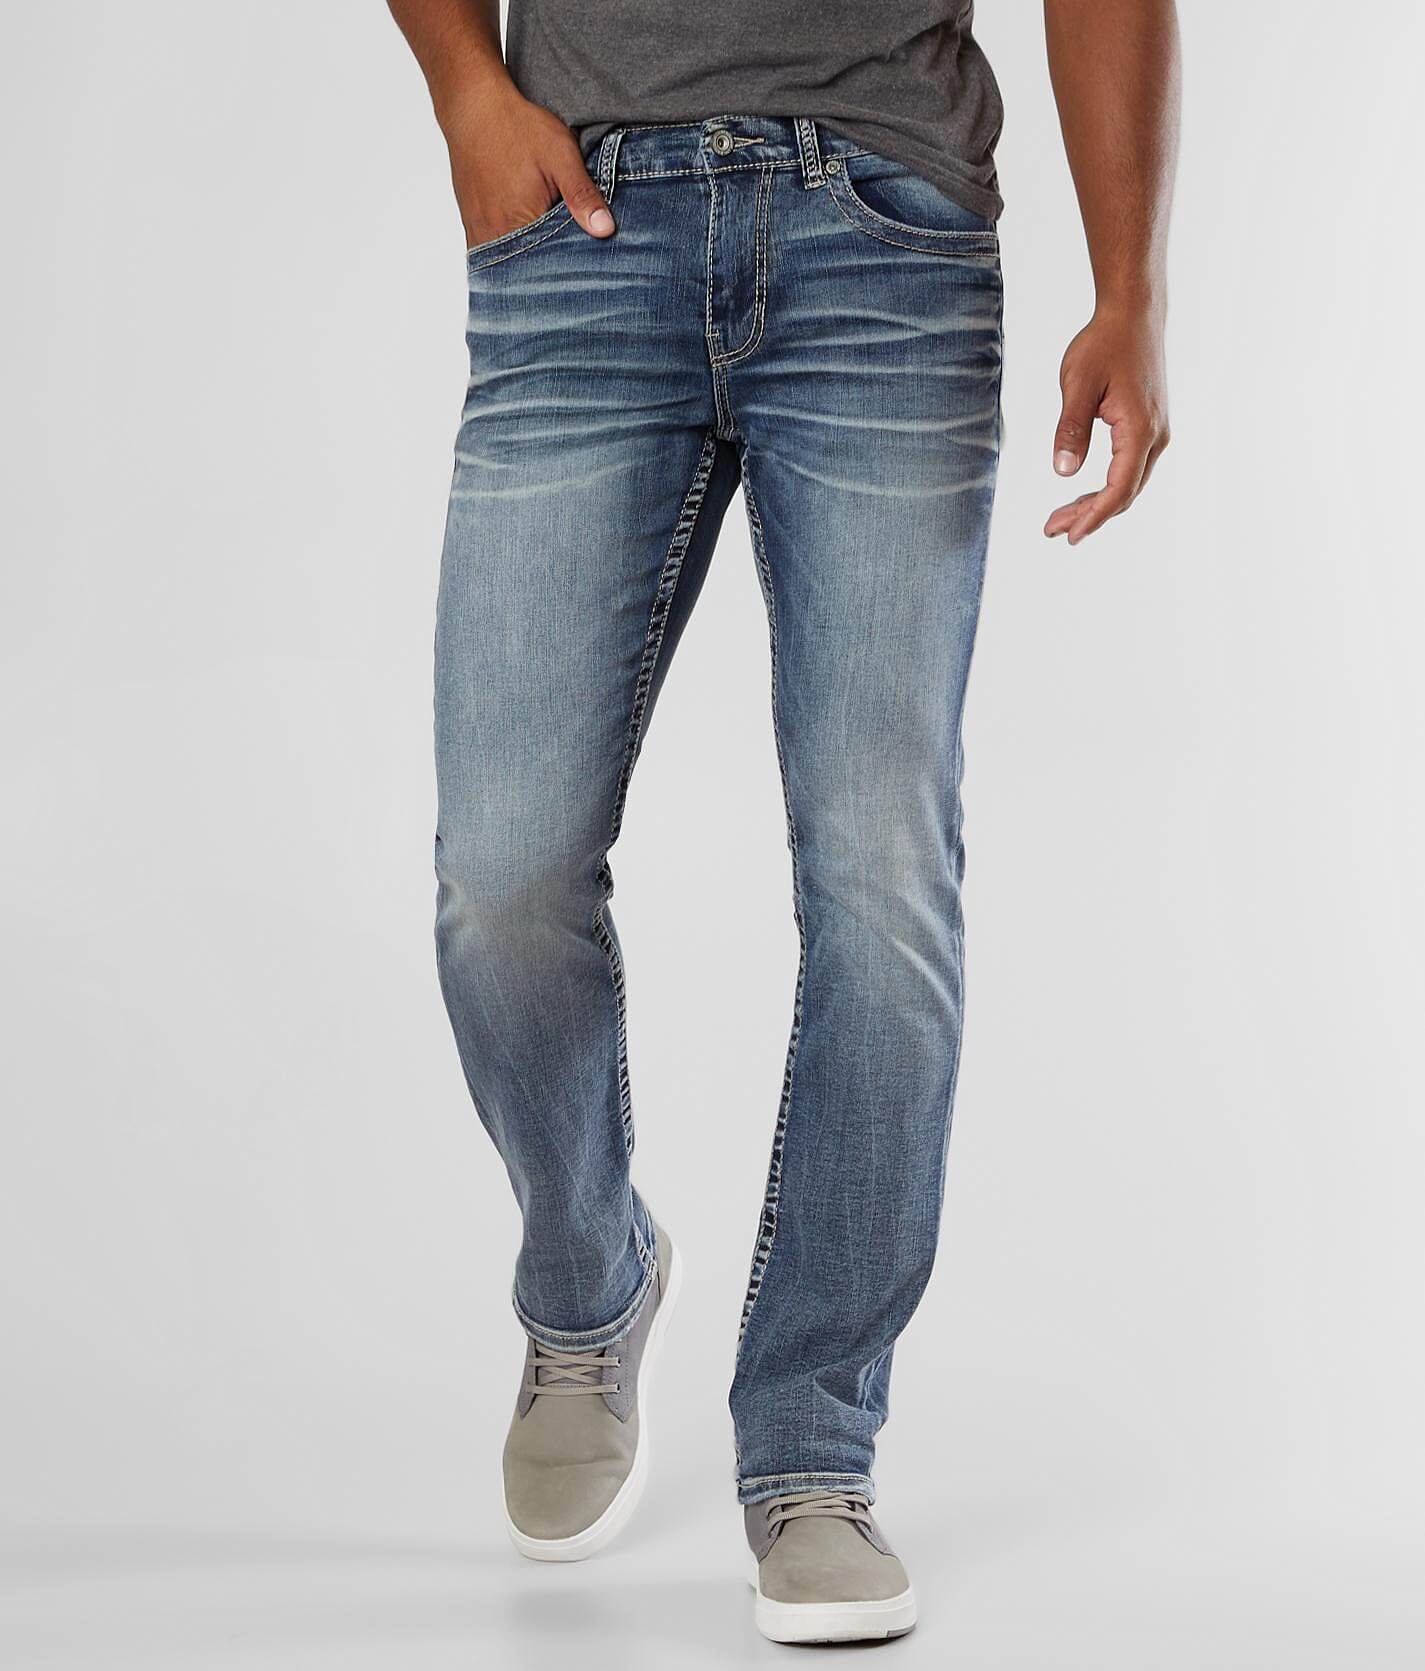 relaxed slim fit jeans